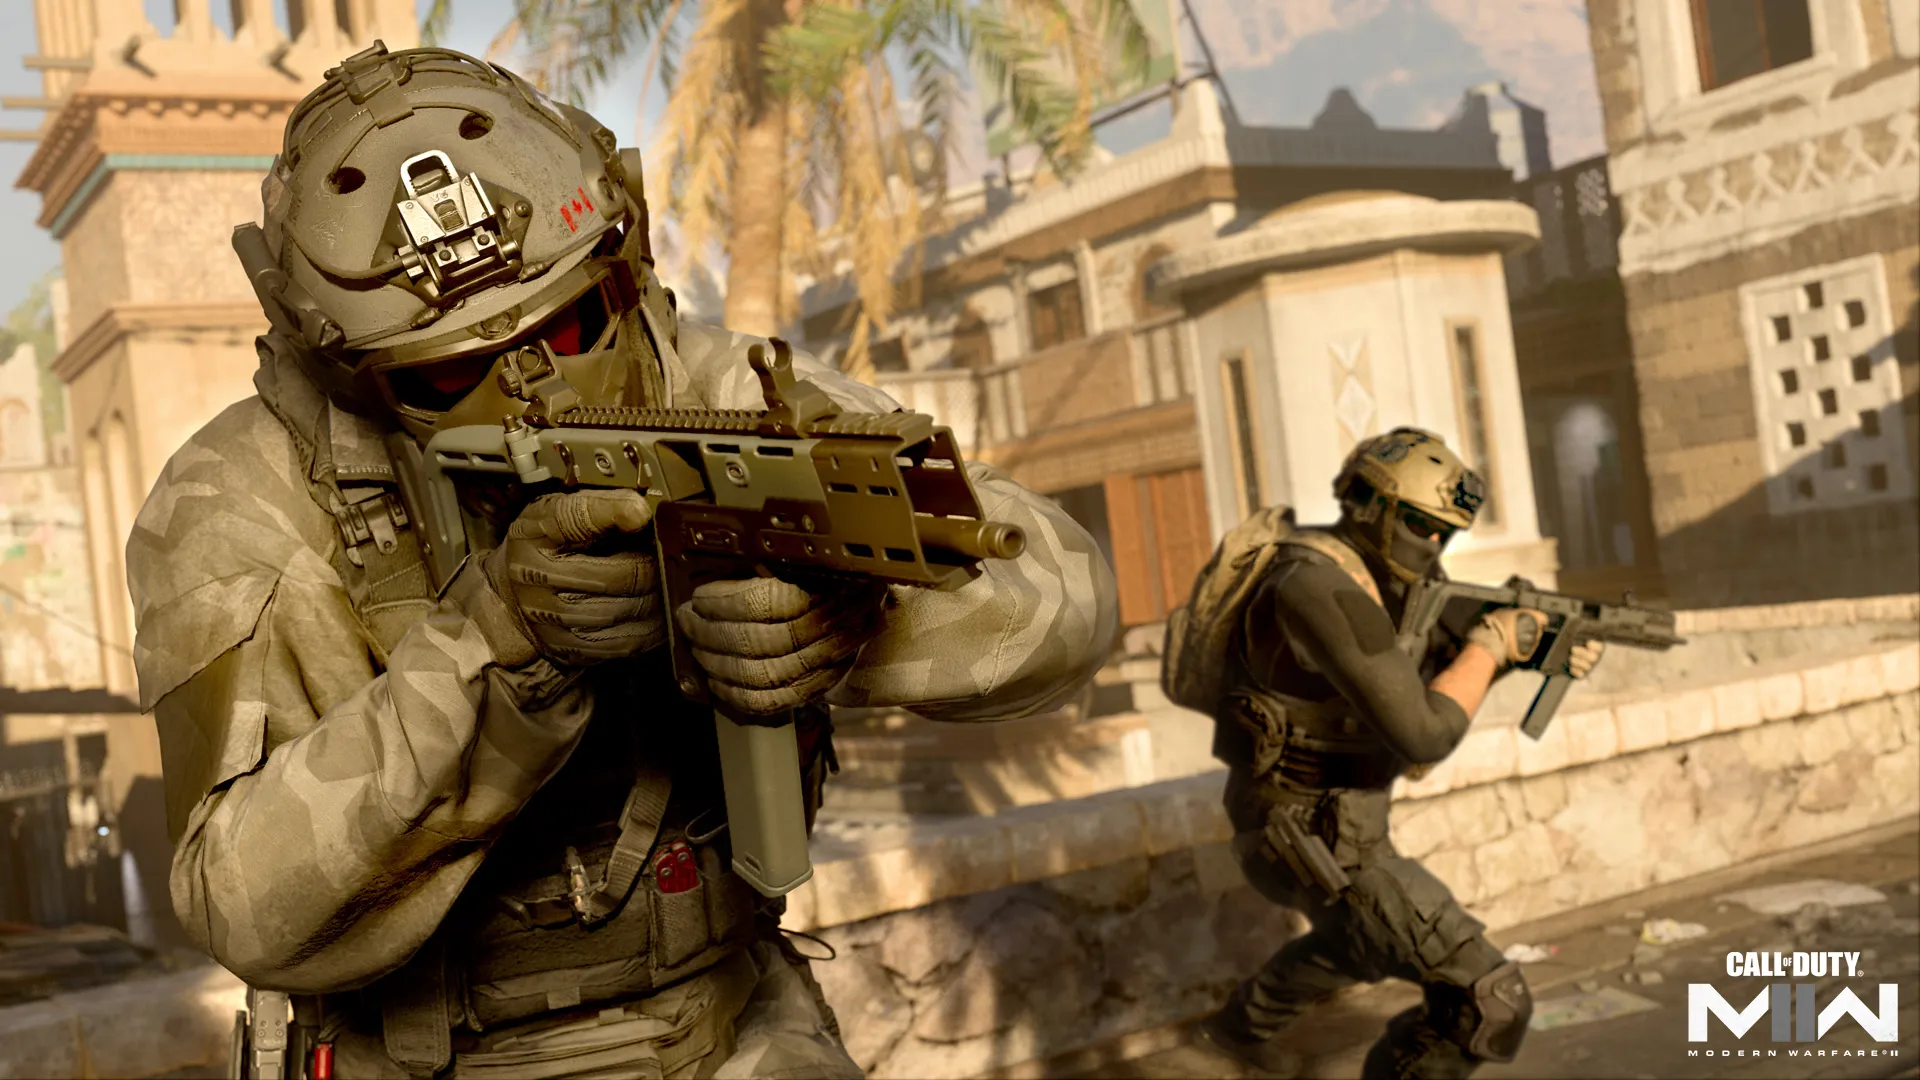 Call of Duty: Warzone 2.0 — Release date, map details, and everything else  we know so far